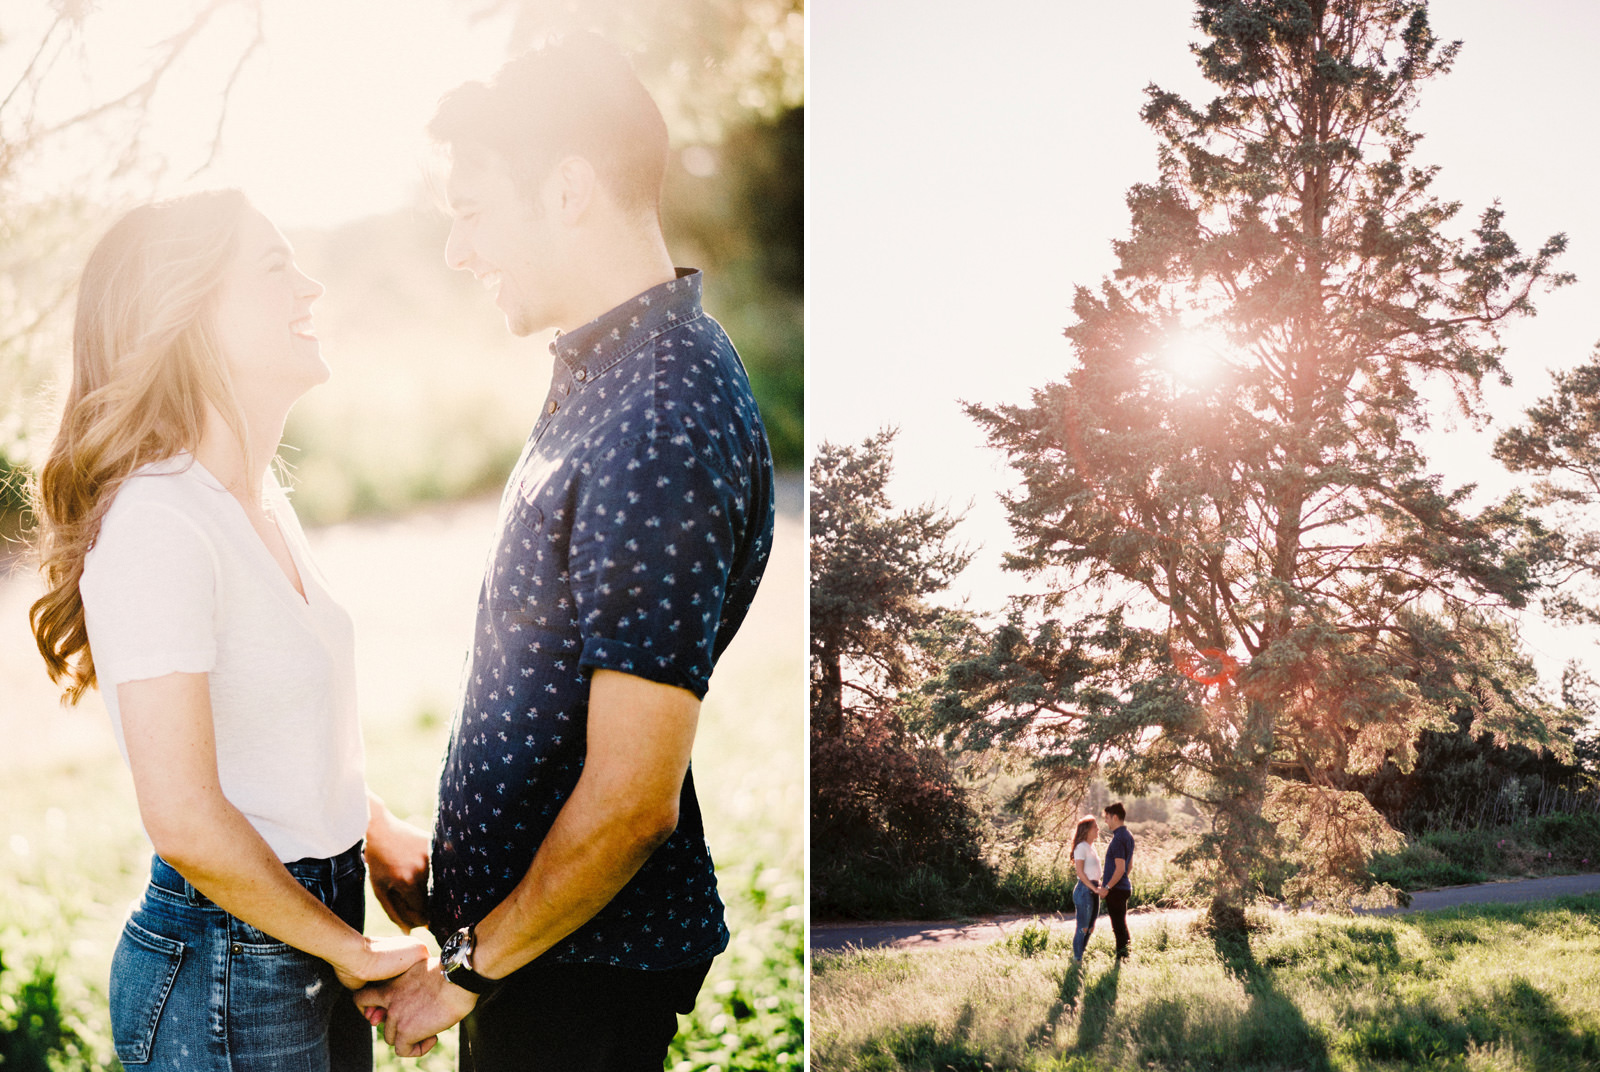 045-summery-engagement-session-with-a-goldendoodle-at-discovery-park-on-film.jpg